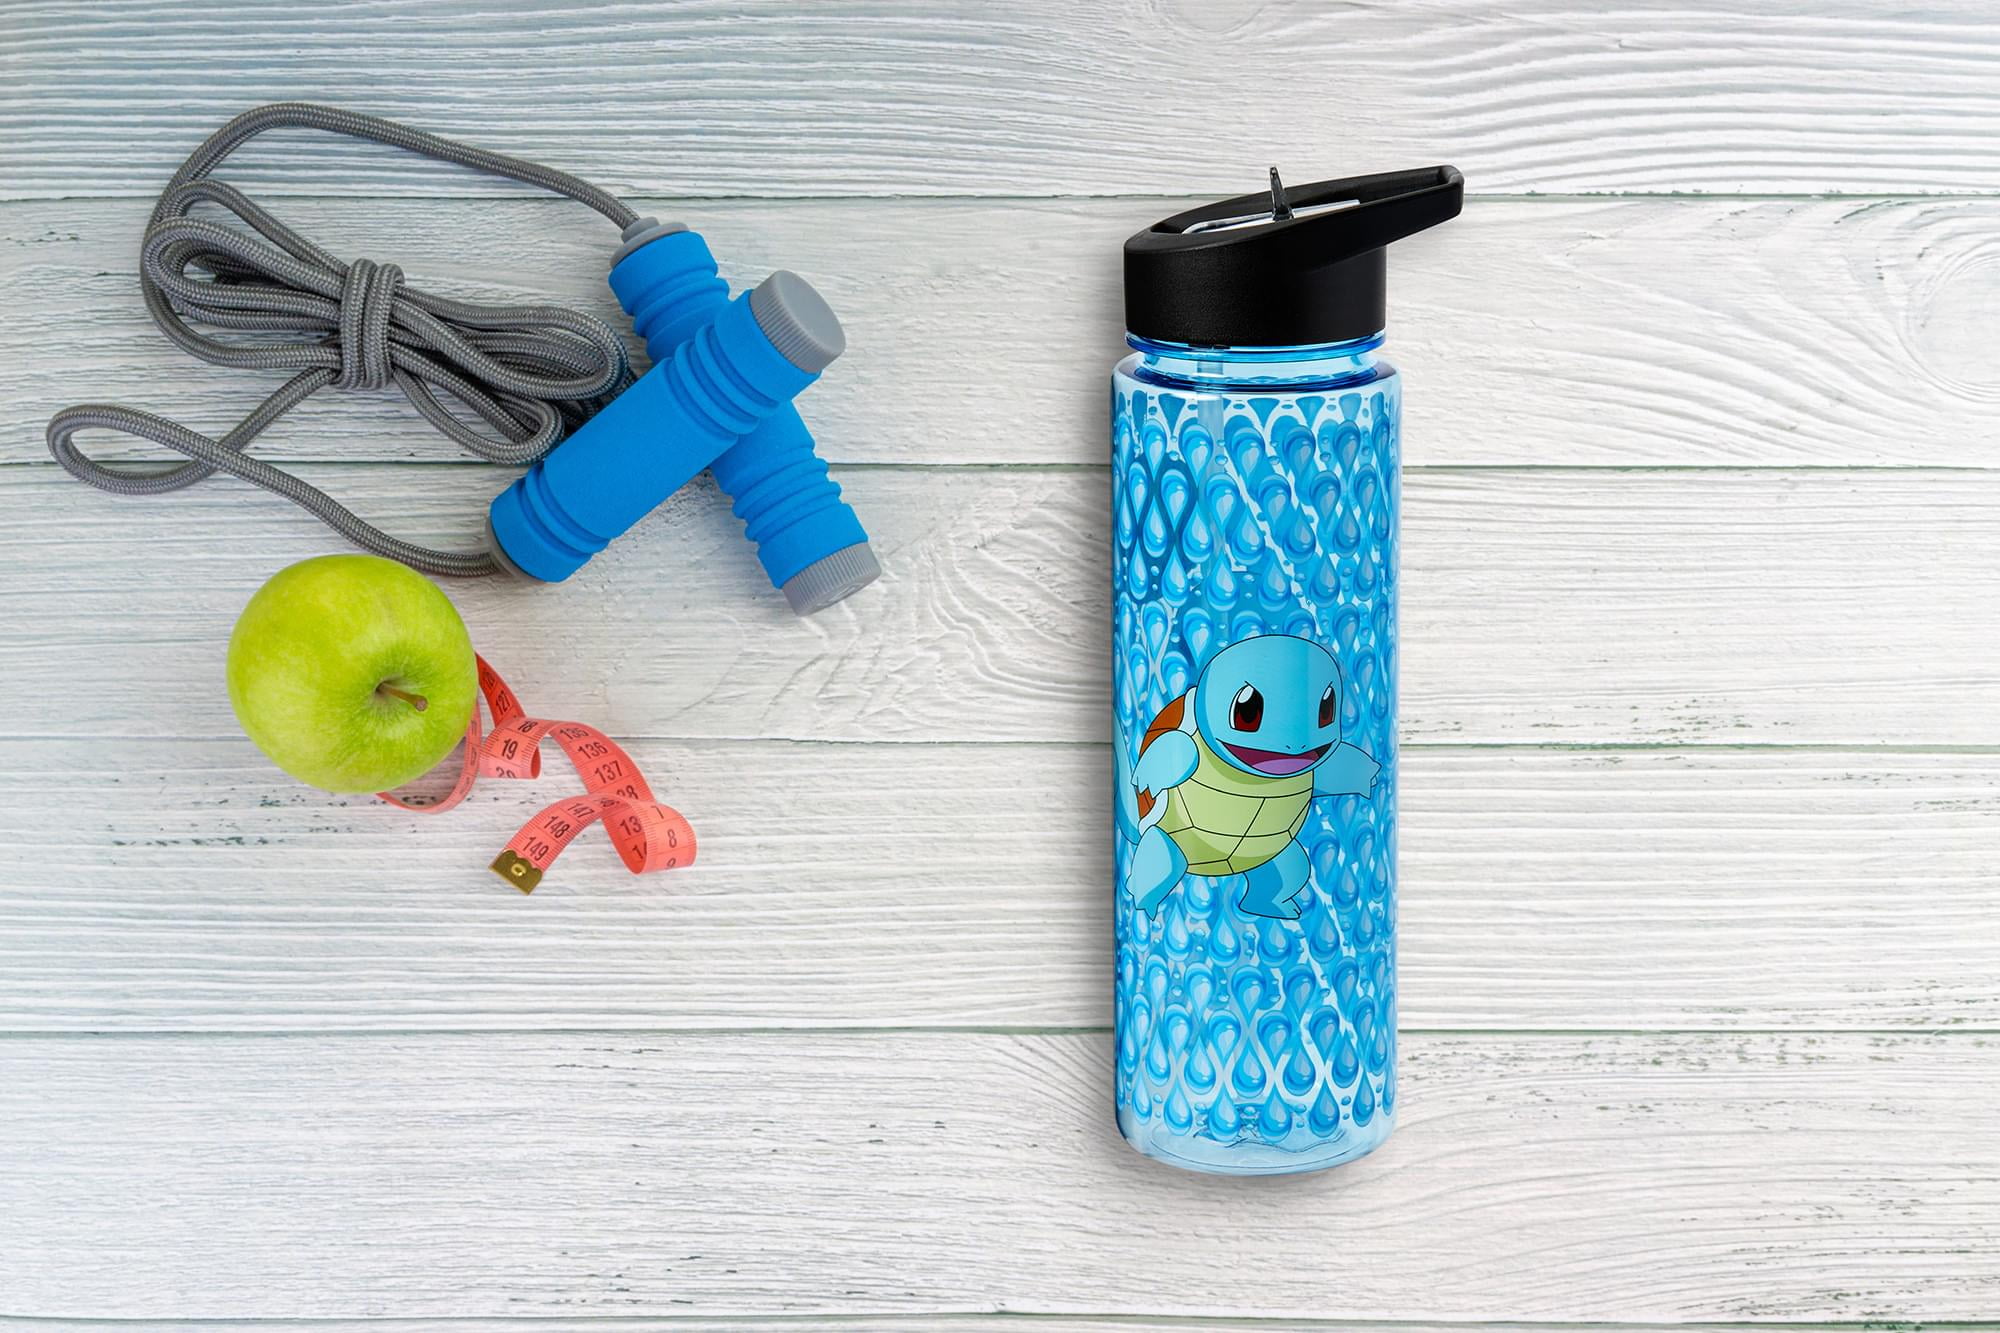 Pokémon: Stainless Water Bottle - Scarlet and Violet Starters - 430ml (With  Cup Ver.)